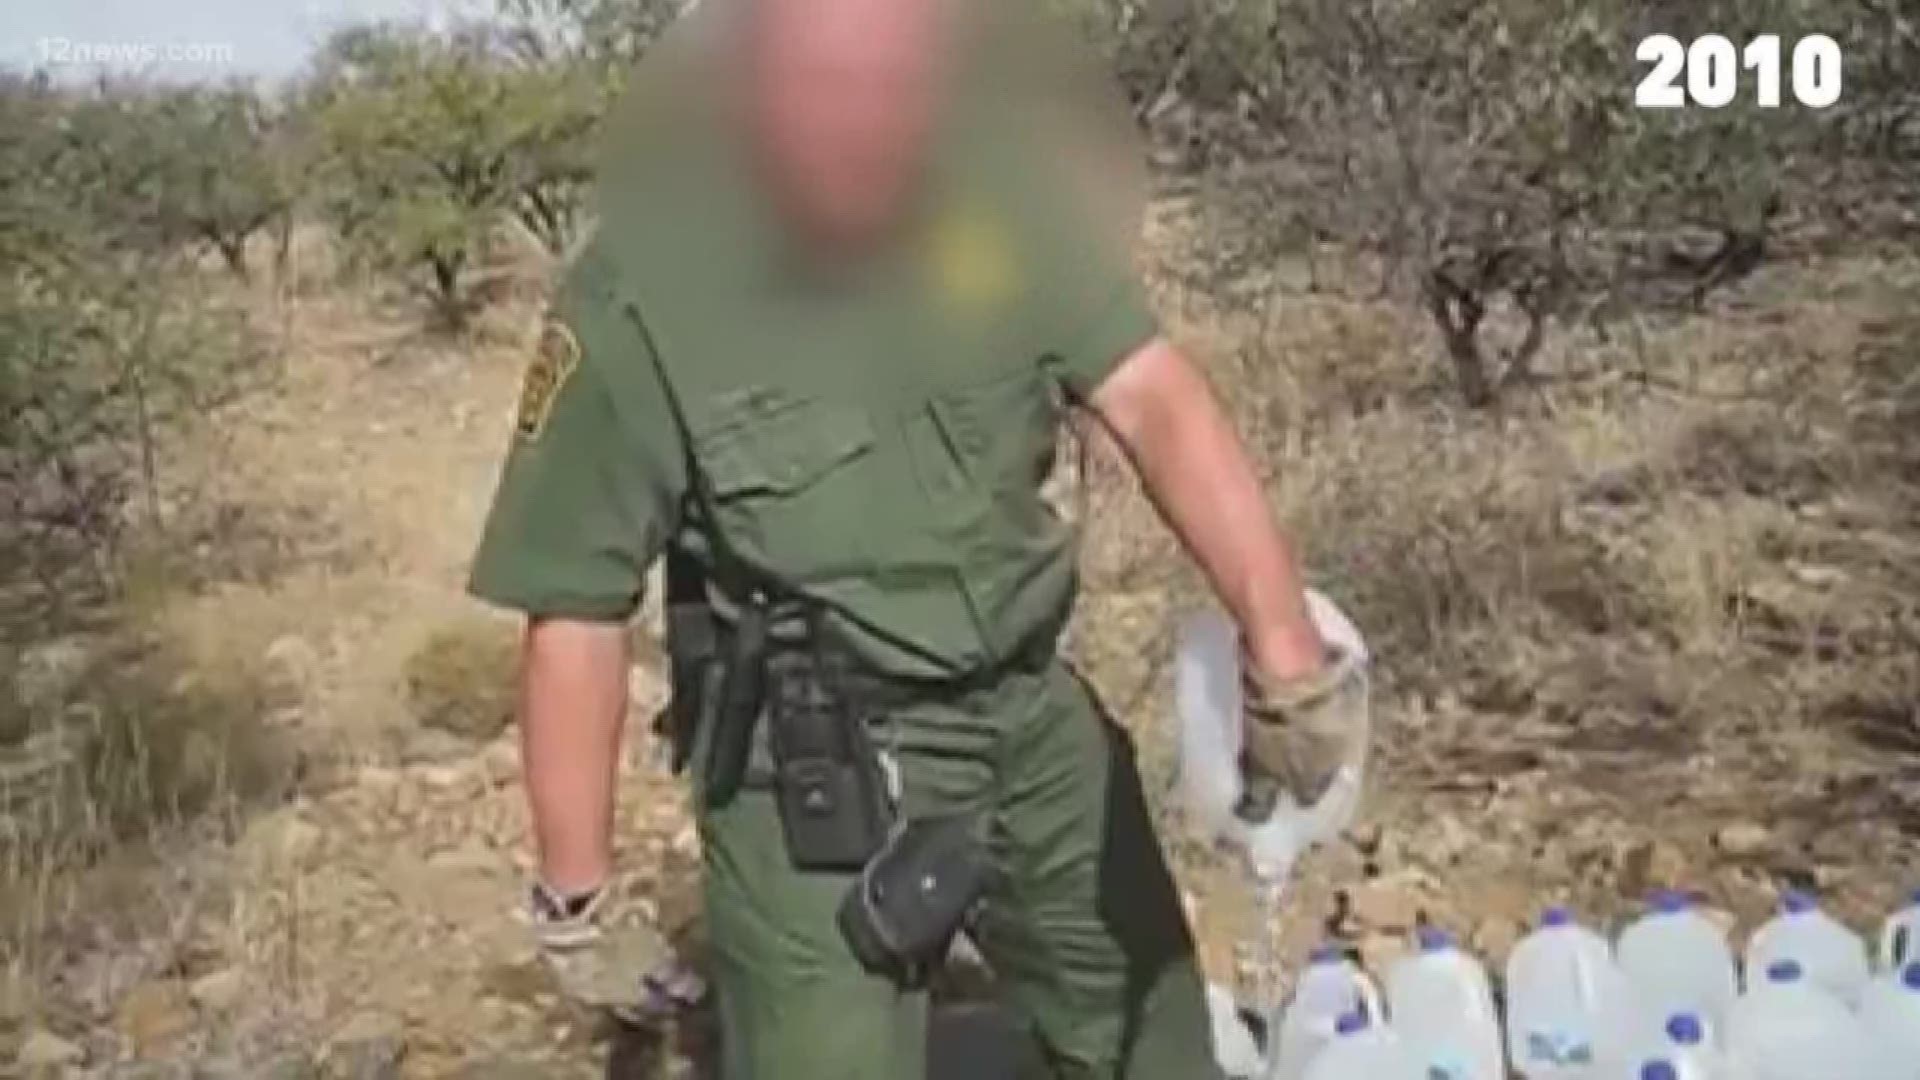 Hidden video showed Arizona Border Agents dumping water from stations left by a humanitarian group called No More Deaths who documented the vandalism.